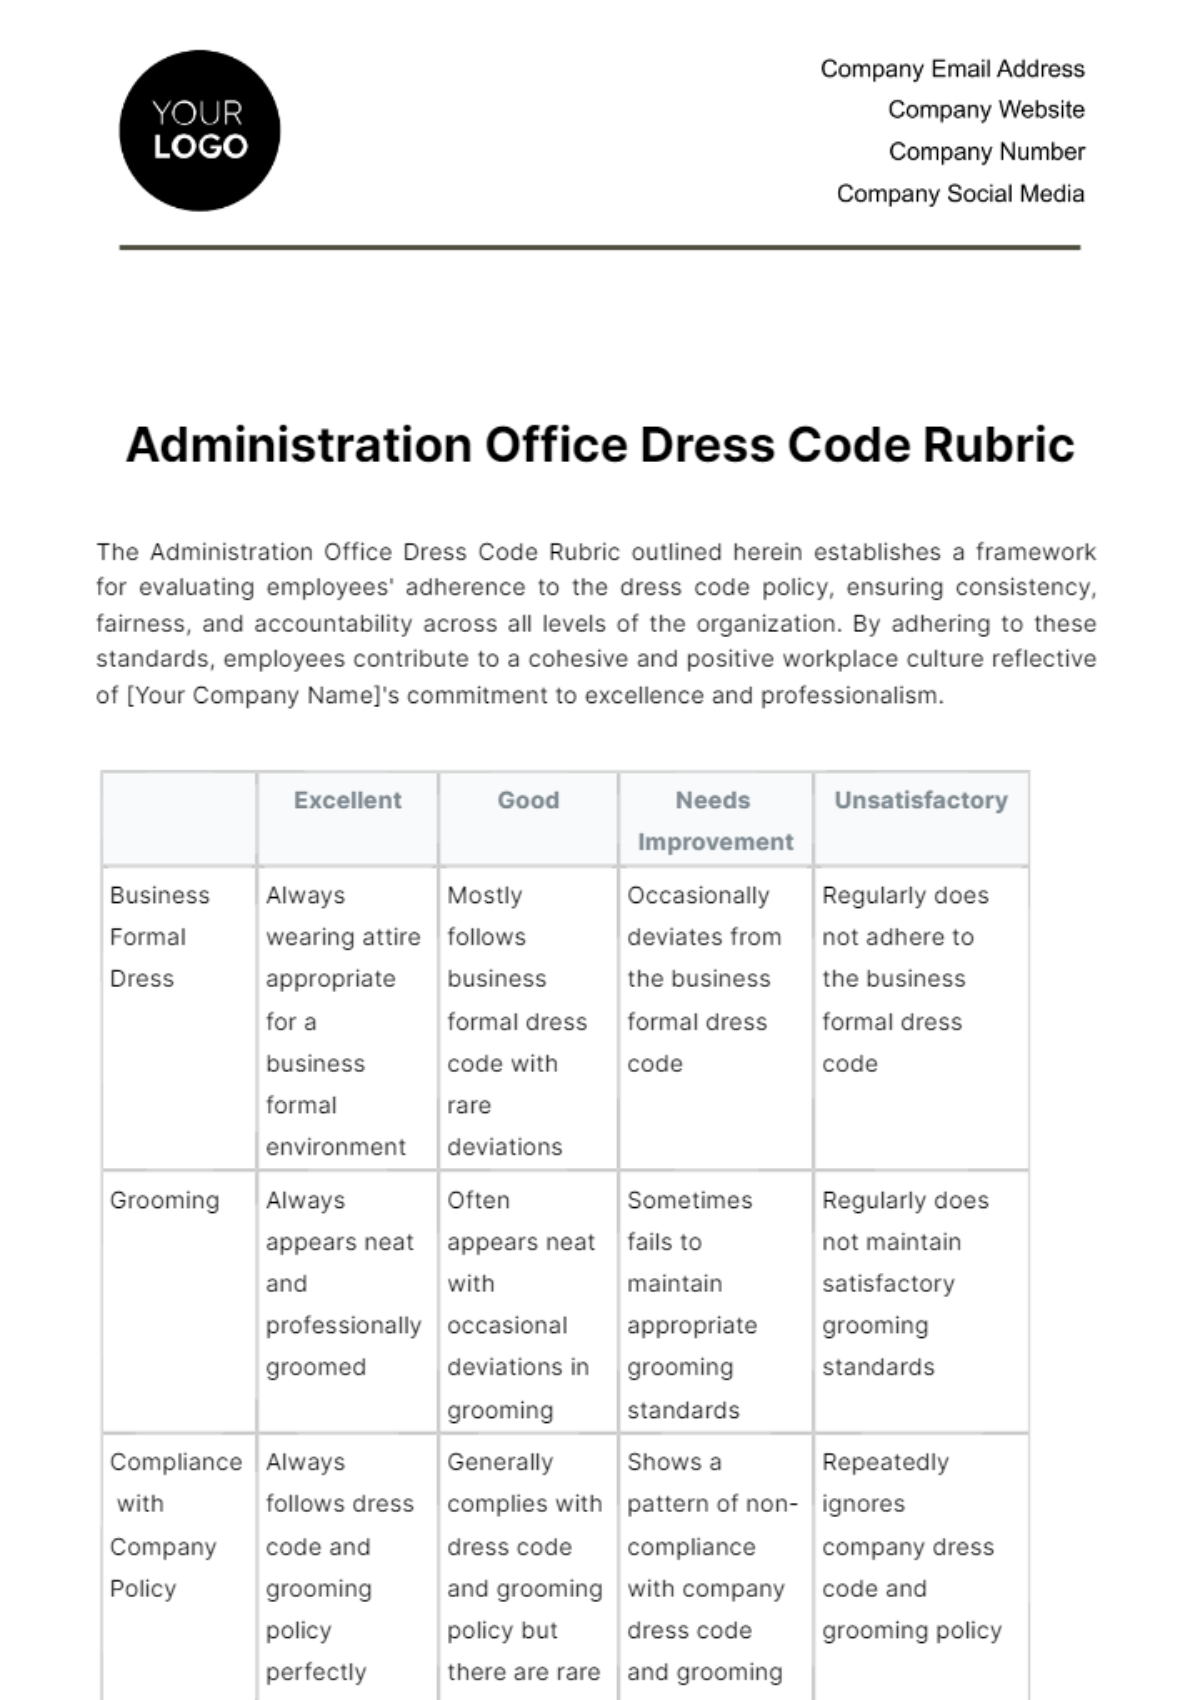 Administration Office Dress Code Rubric Template